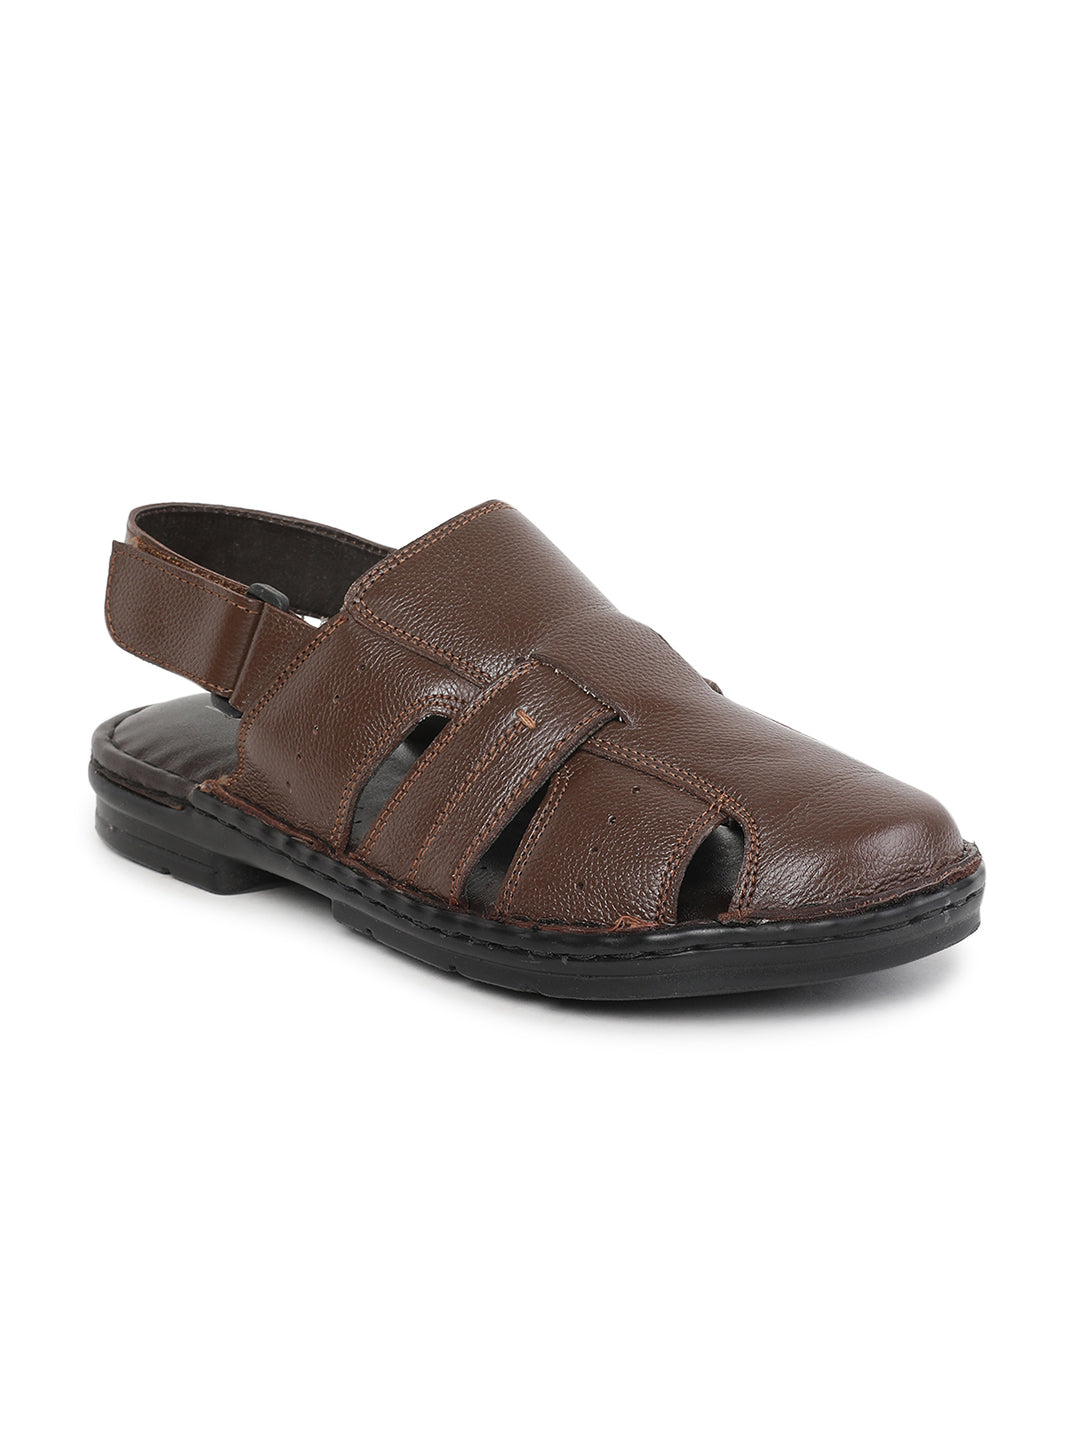 Paragon  R10308G Men Stylish Sandals | Comfortable Sandals for Daily Outdoor Use | Casual Formal Sandals with Cushioned Soles